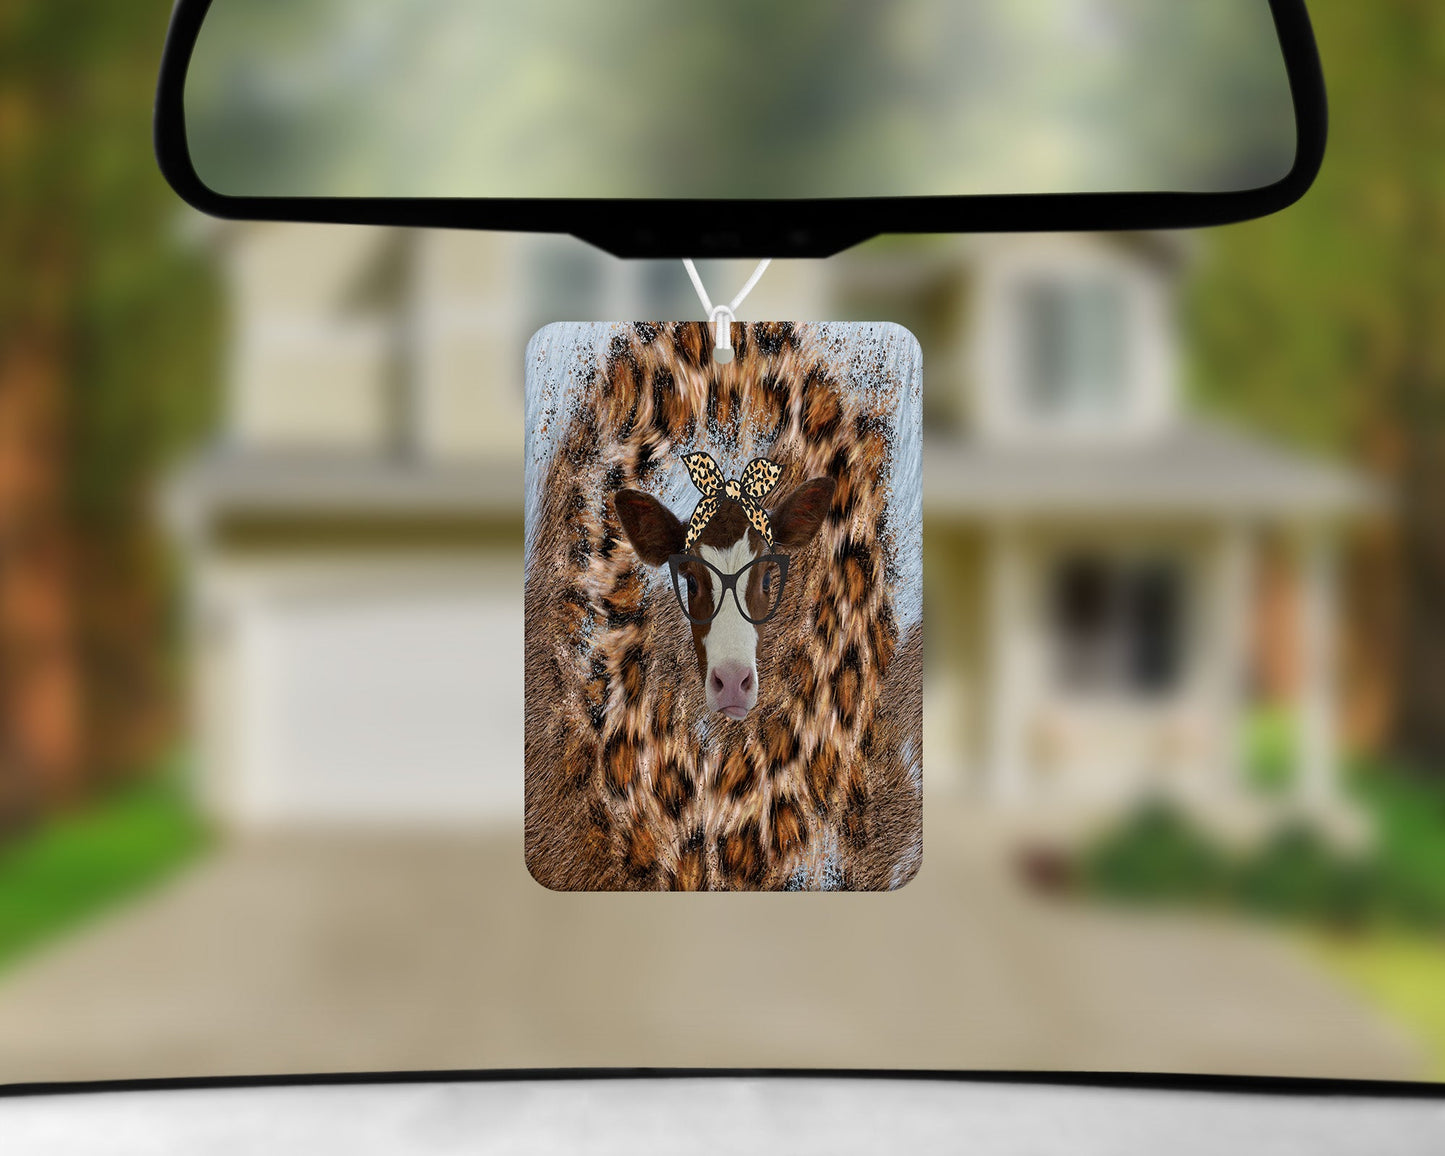 Leopard Print Cow |Freshie|Includes Scent Bottle - Vehicle Air Freshener